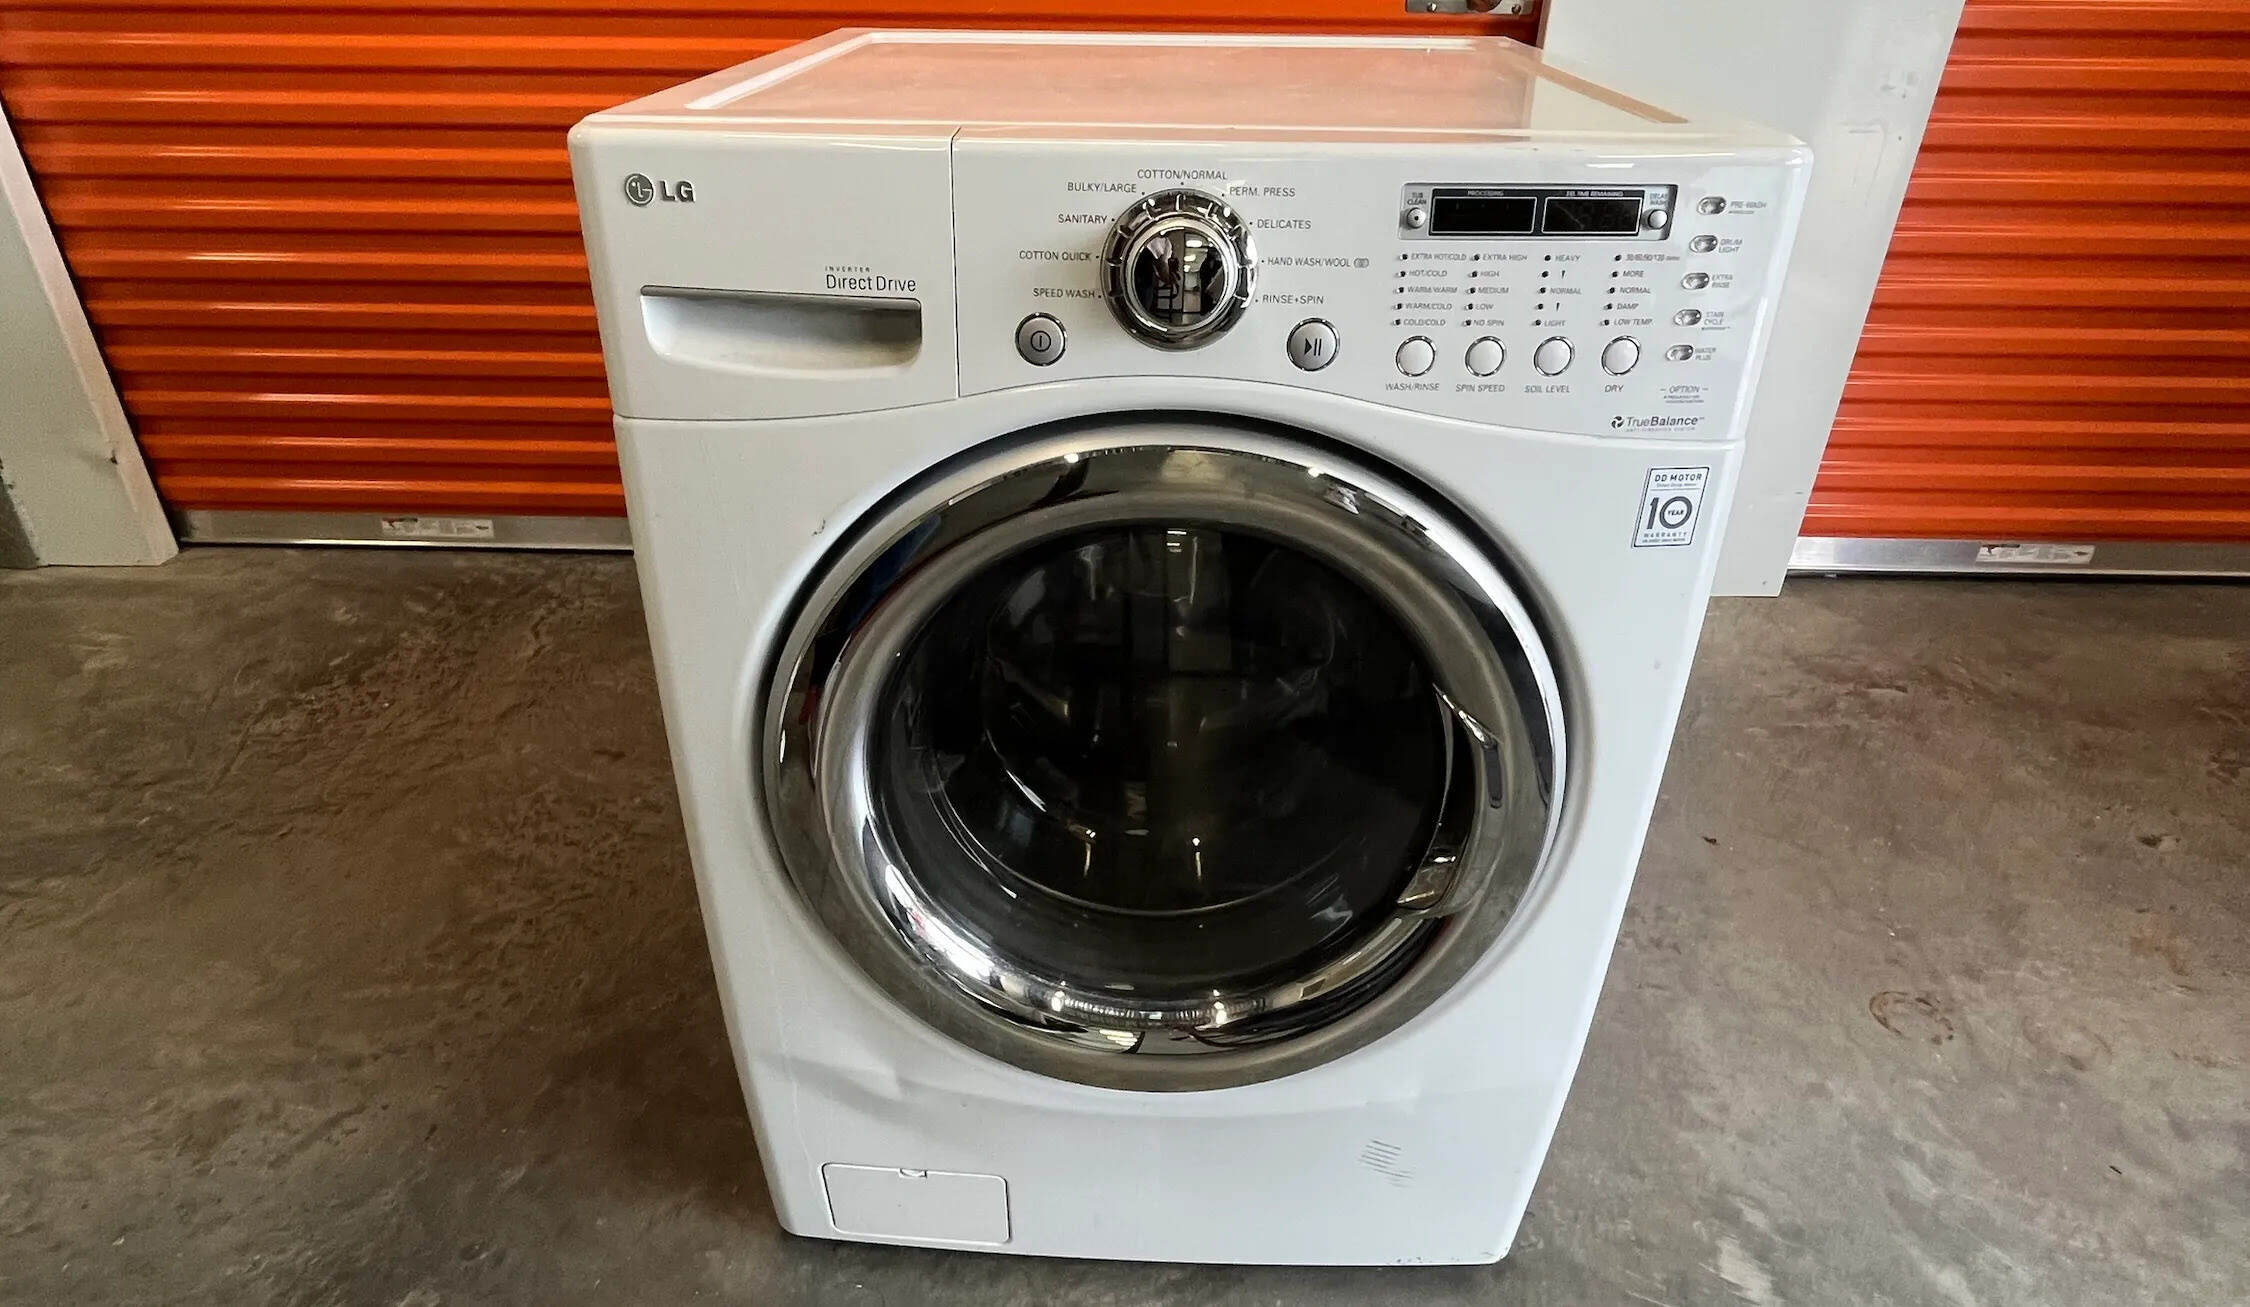 How To Fix The Error Code UD For LG Washing Machine